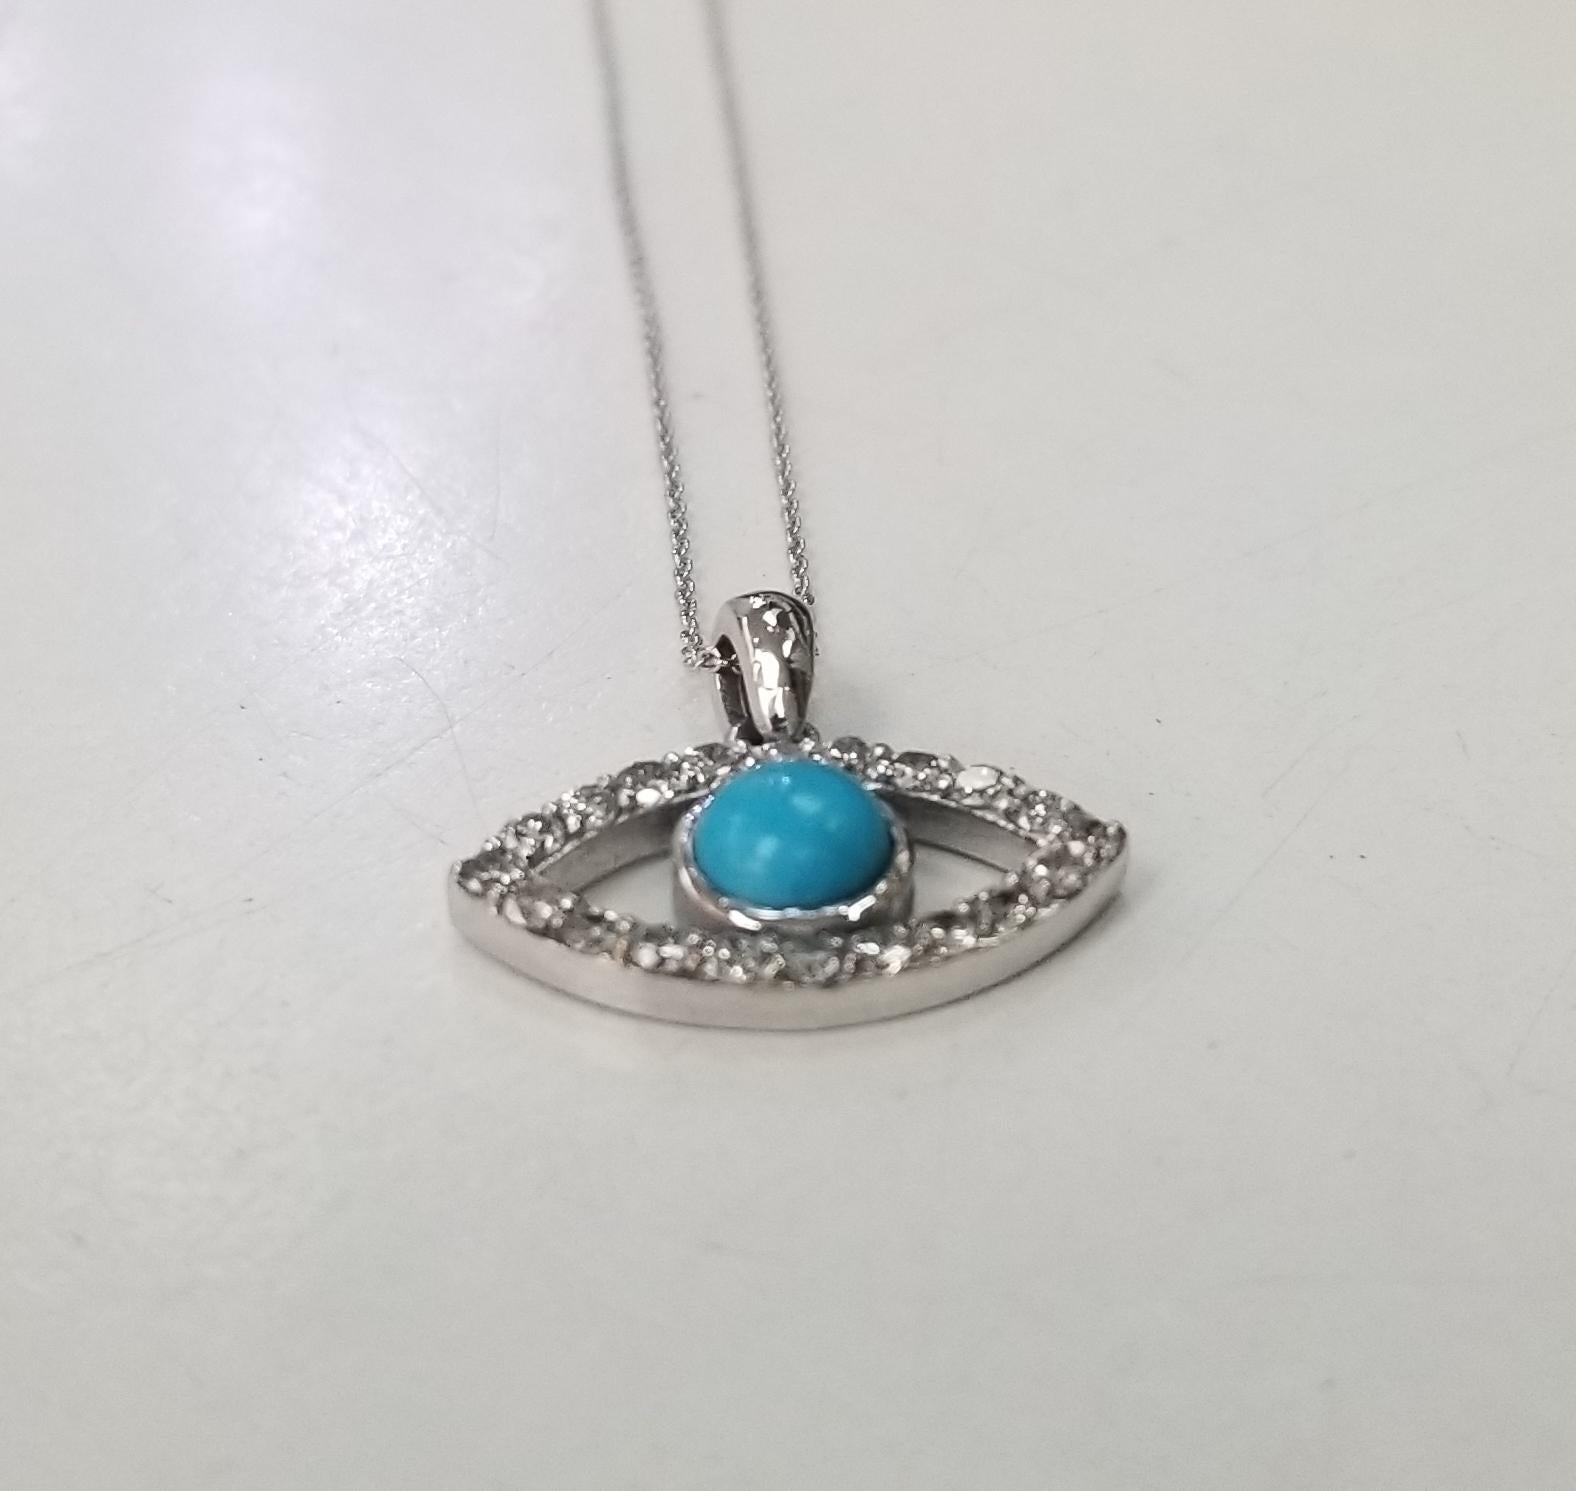 Total Carat Weight:APPROX 0.31CT
Style:Chain
WEIGHT:3GR
Base Metal:Gold
Diamond Clarity Grade:Slightly Included (SI1)
Setting Style:Prong
Number of Gemstones:20
Type:Necklace
Secondary Stone:Turquoise 
Cut Grade:Very Good
Main Stone Color:NEAR